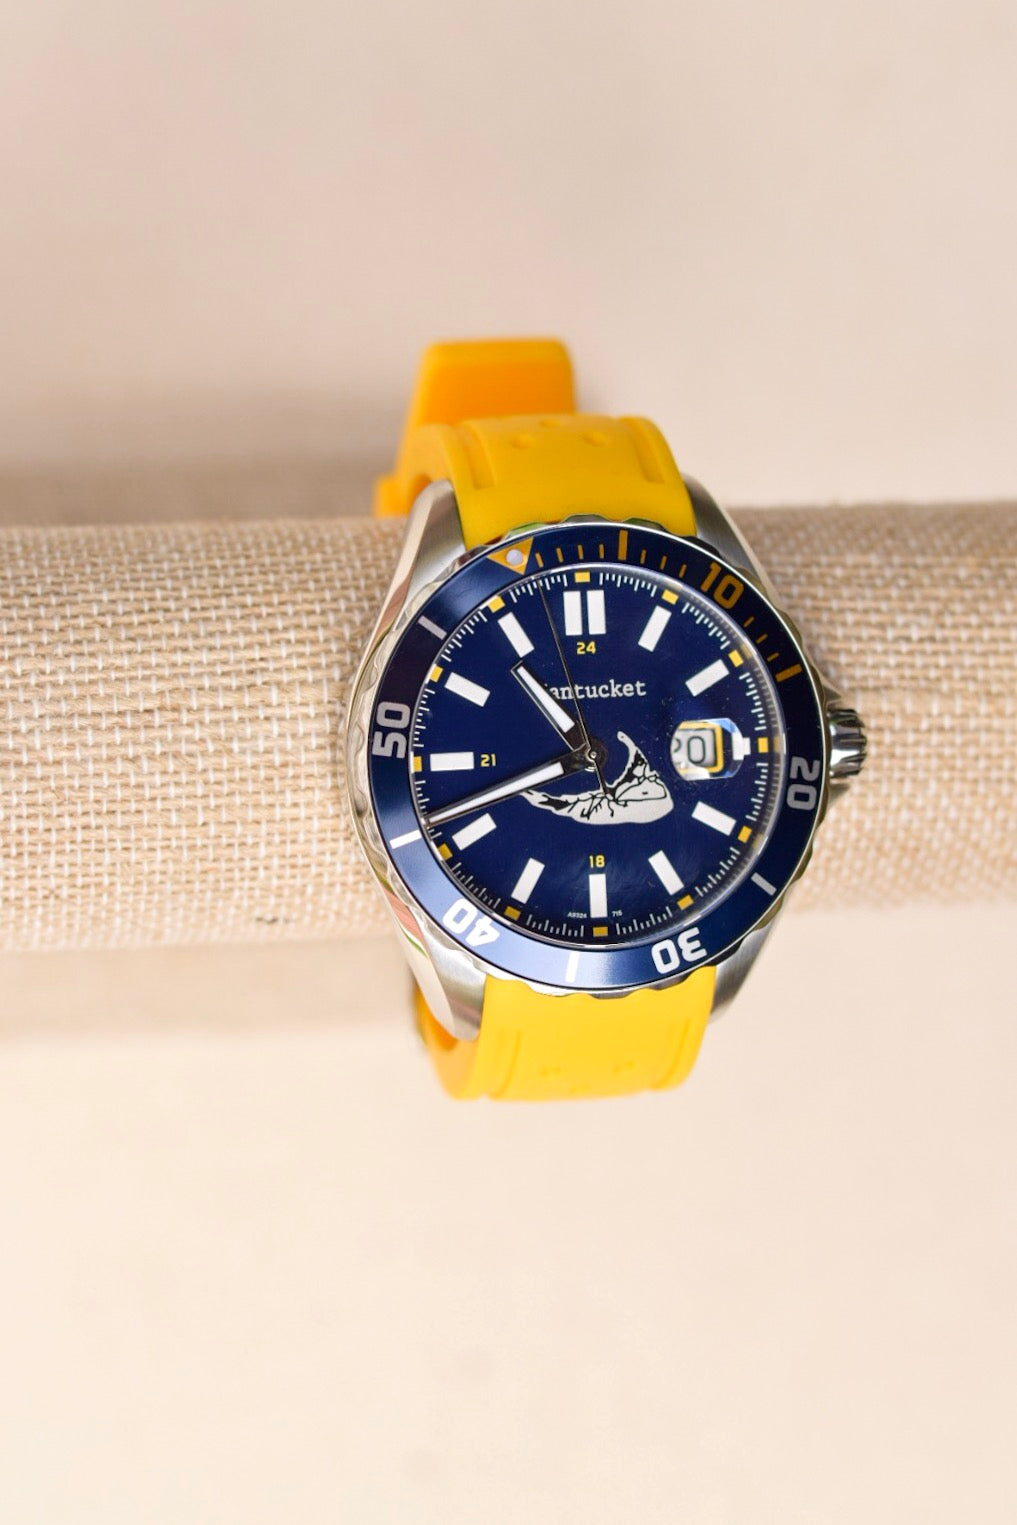 Nantucket Island Chronograph Dive Watch with yellow strap by Jewel in the Sea Nantucket